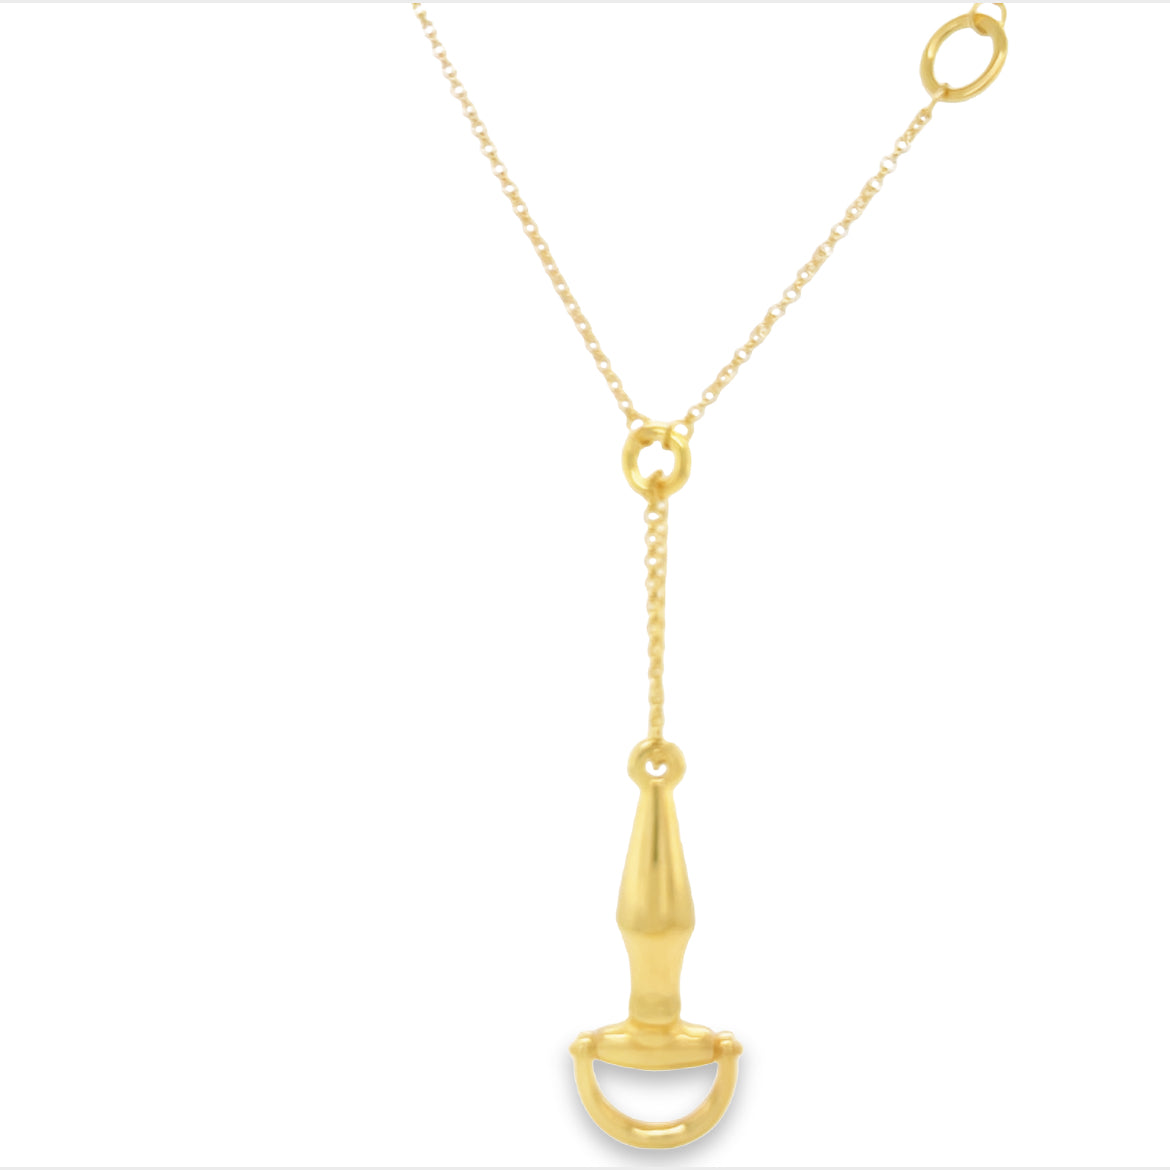 Very stylish  14k yellow gold.  Italian made.  Horse bit pendant 1.5" long  25.00 wide   18" long  Secure lobster catch